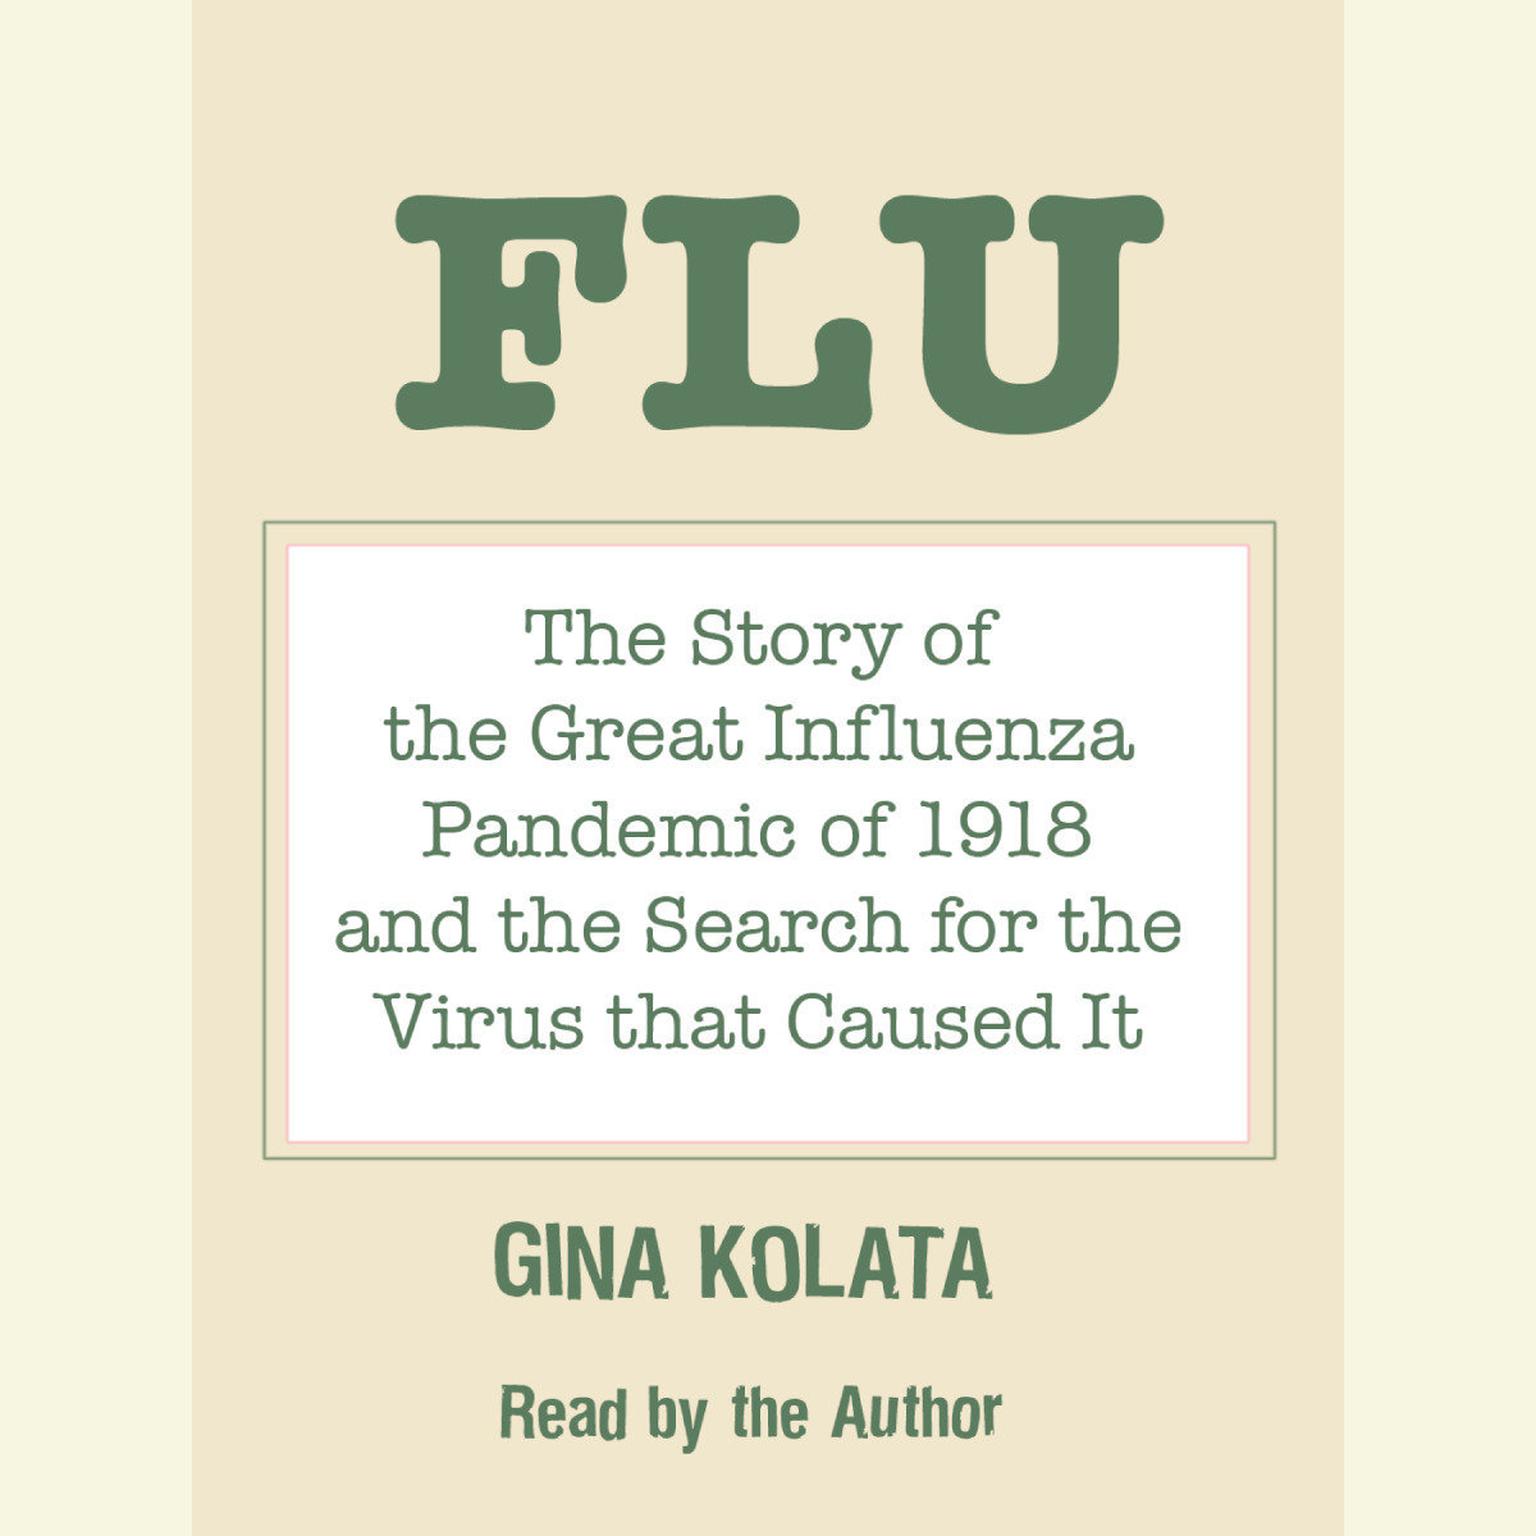 Flu (Abridged): The Story of the Great Influenza Pandemic of 1918 and the Search for the Virus that Caused It Audiobook, by Gina Kolata